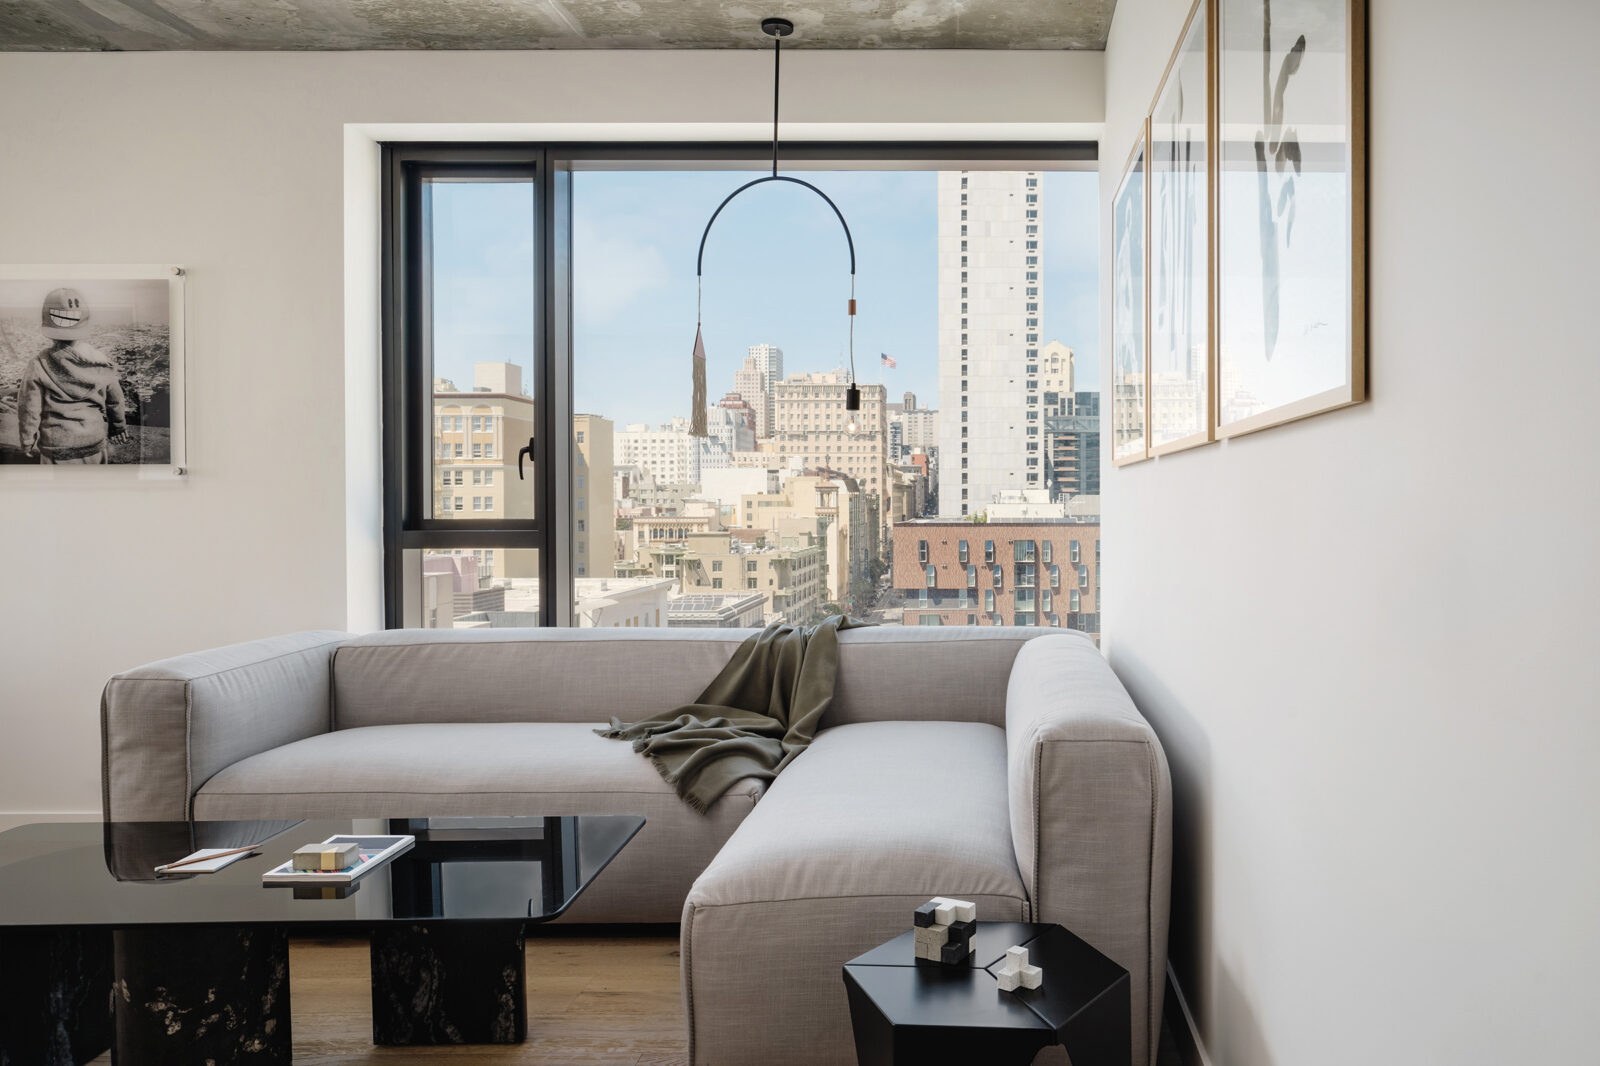 A grey sectional couch positioned next to a glass window, providing a wonderful view of the city.